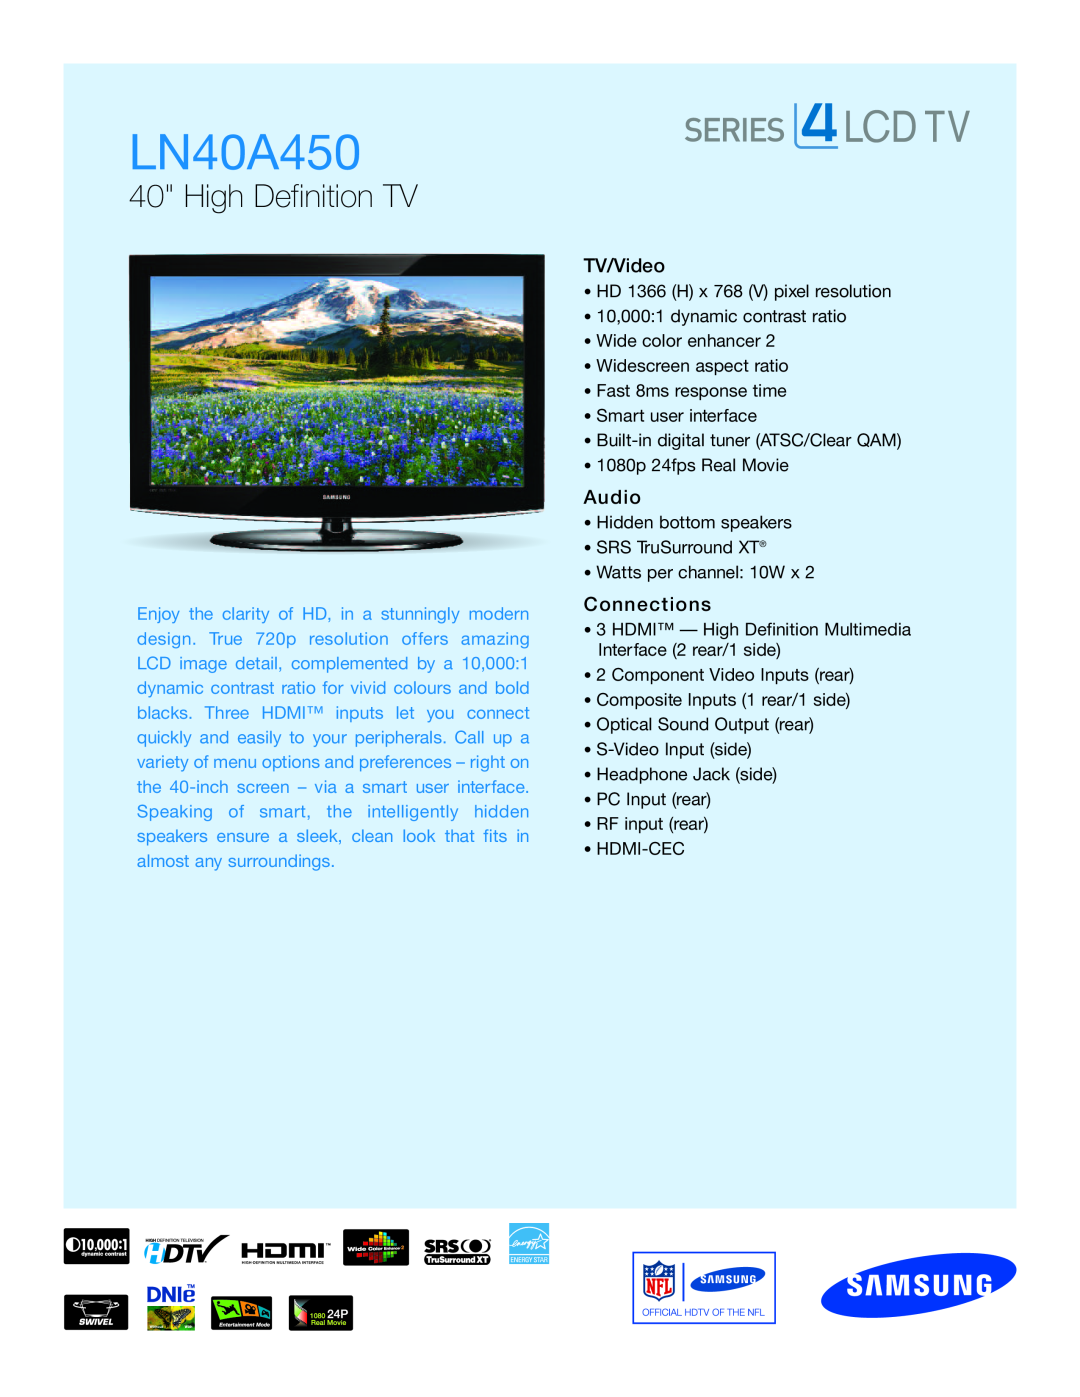 Samsung LN40A450 manual High Definition TV, Lcdtv, TV/Video, Audio, Connect ions 